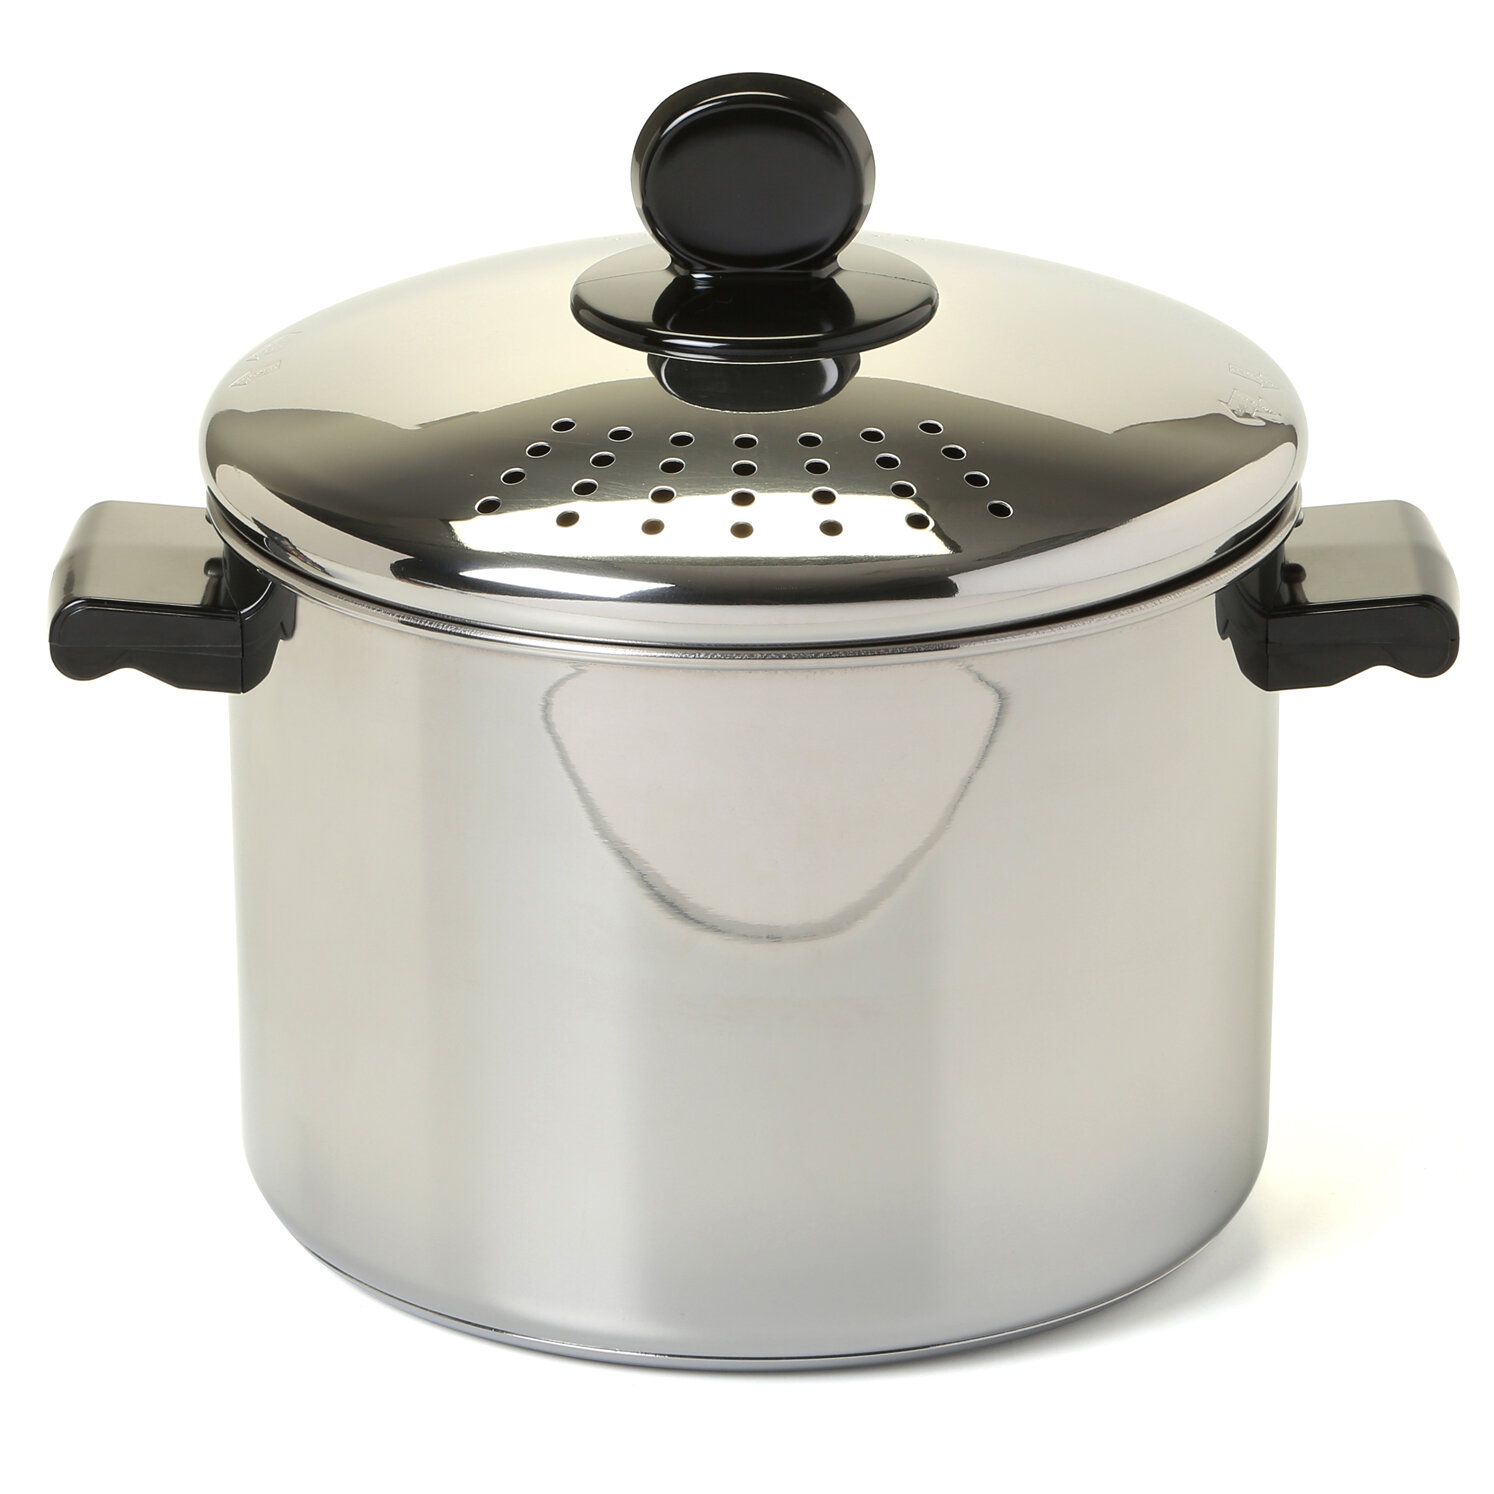 Details about   Mainstays 8 Quart Stainless Steel Stock Pot with Metal Lid. 